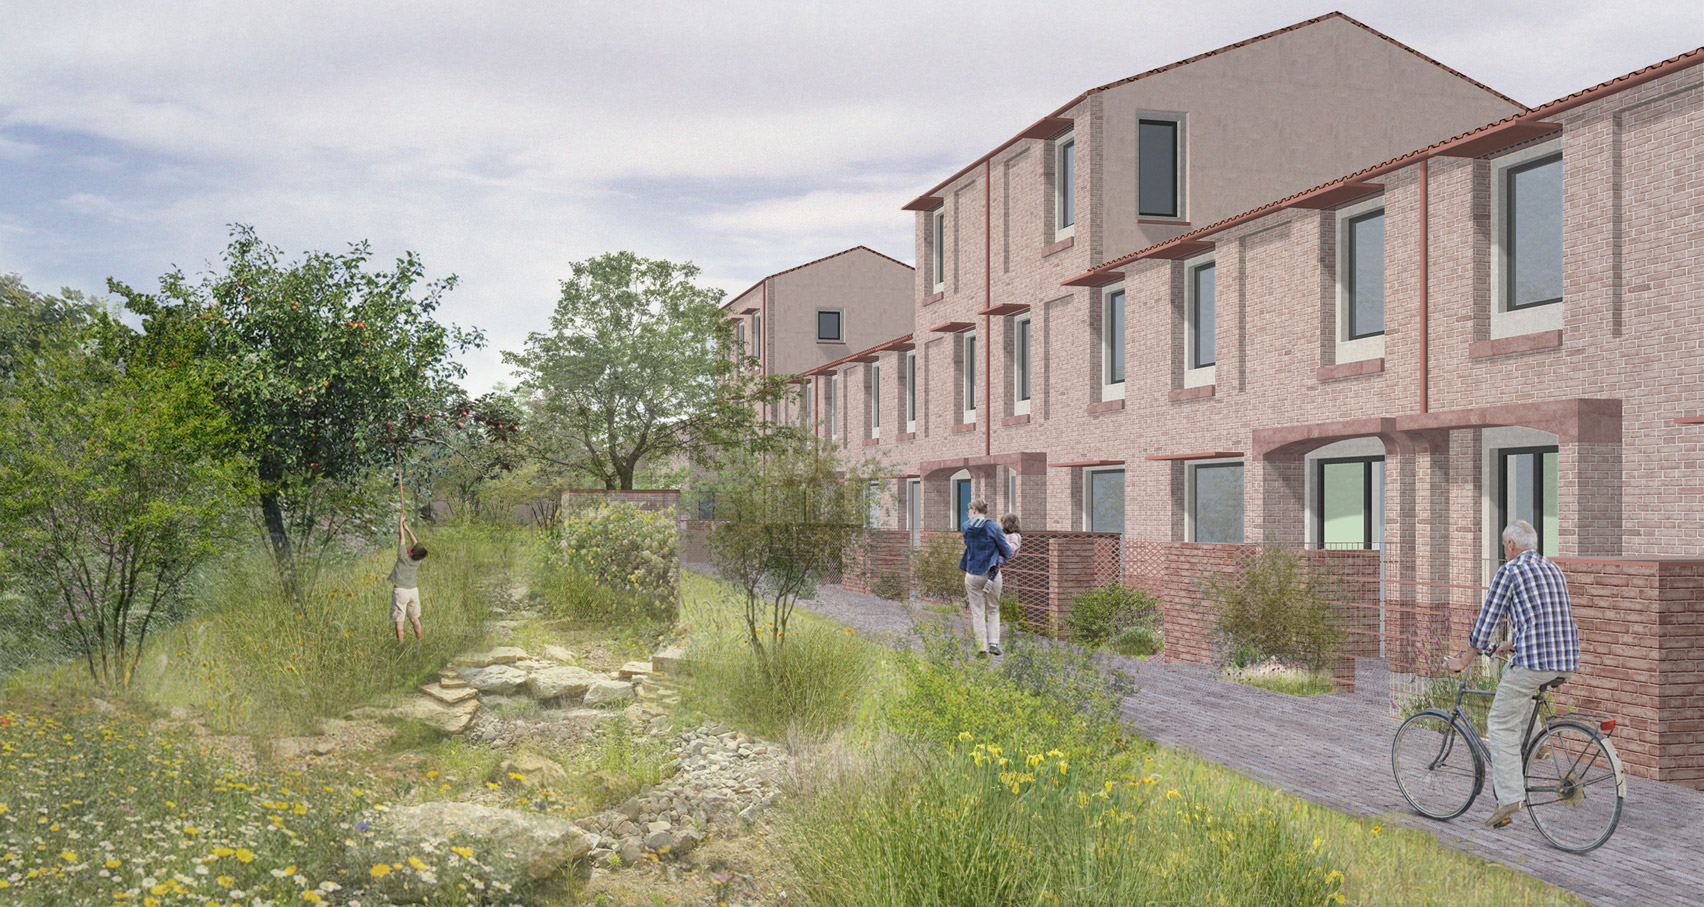 Landscape design of a site from Mikhail Riches Housing Delivery Programme for the City of York